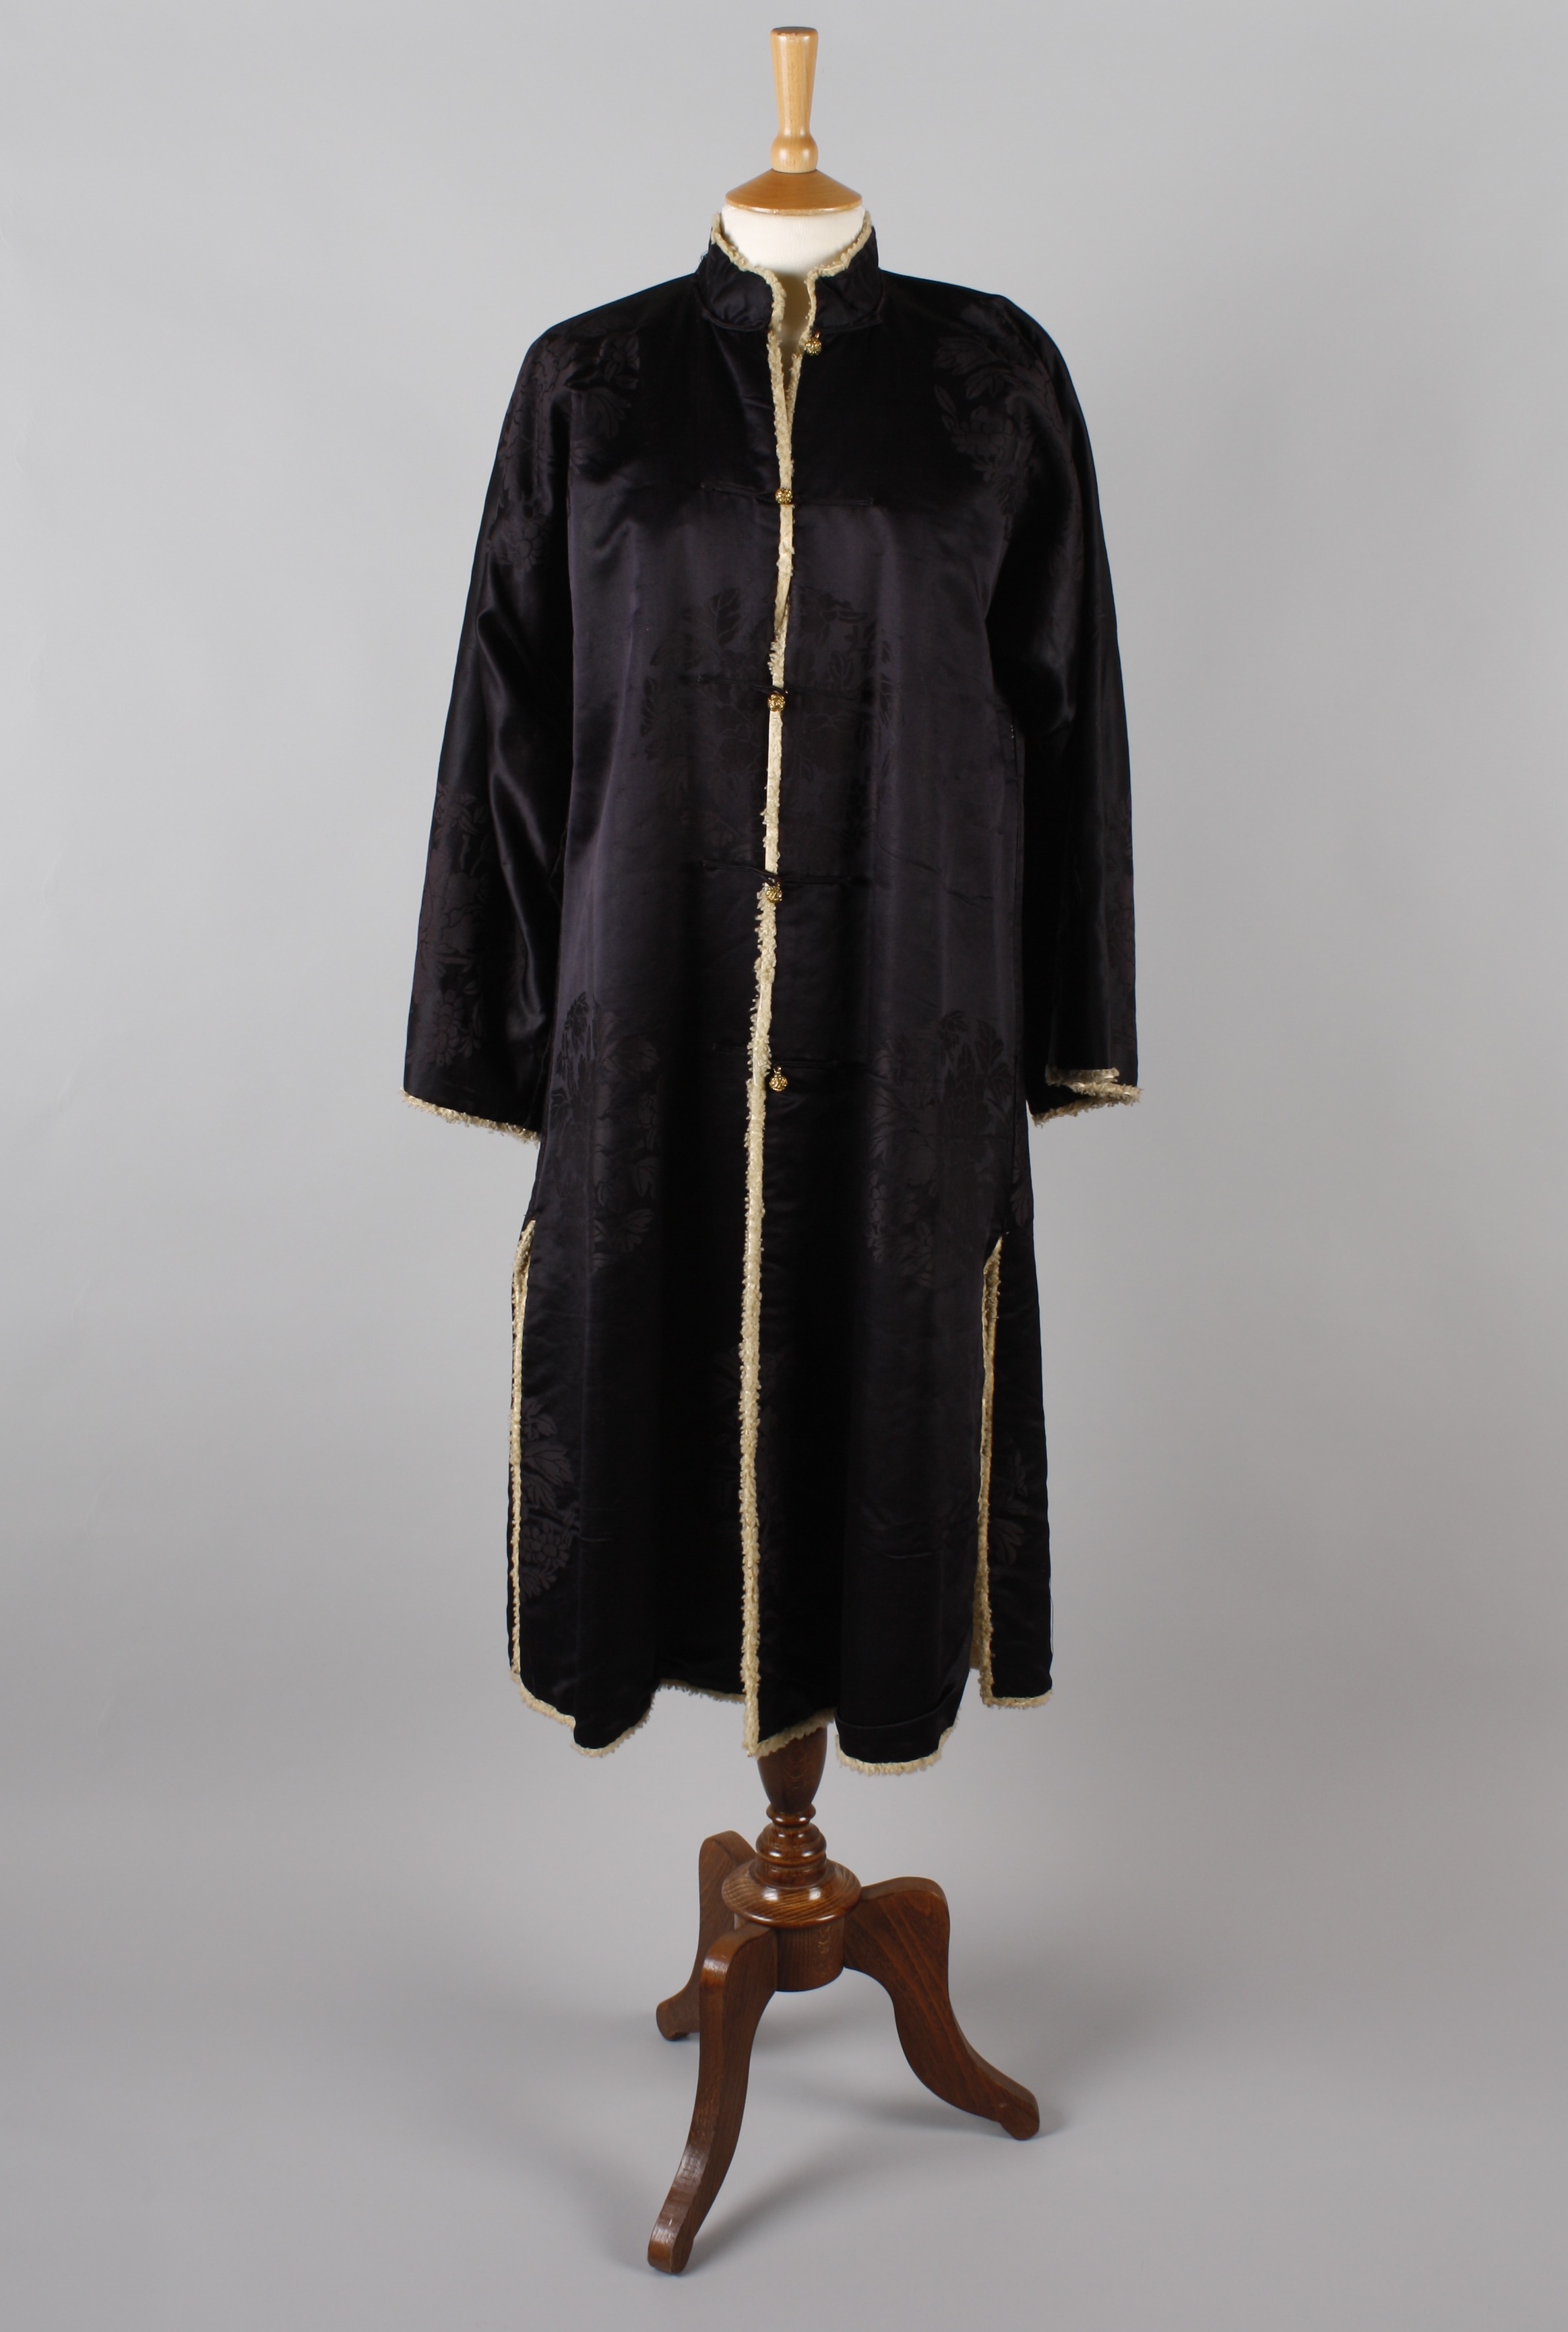 A Chinese midnight blue silk winter coat, lined with sheepskin, having a Mandarin collar, side vents